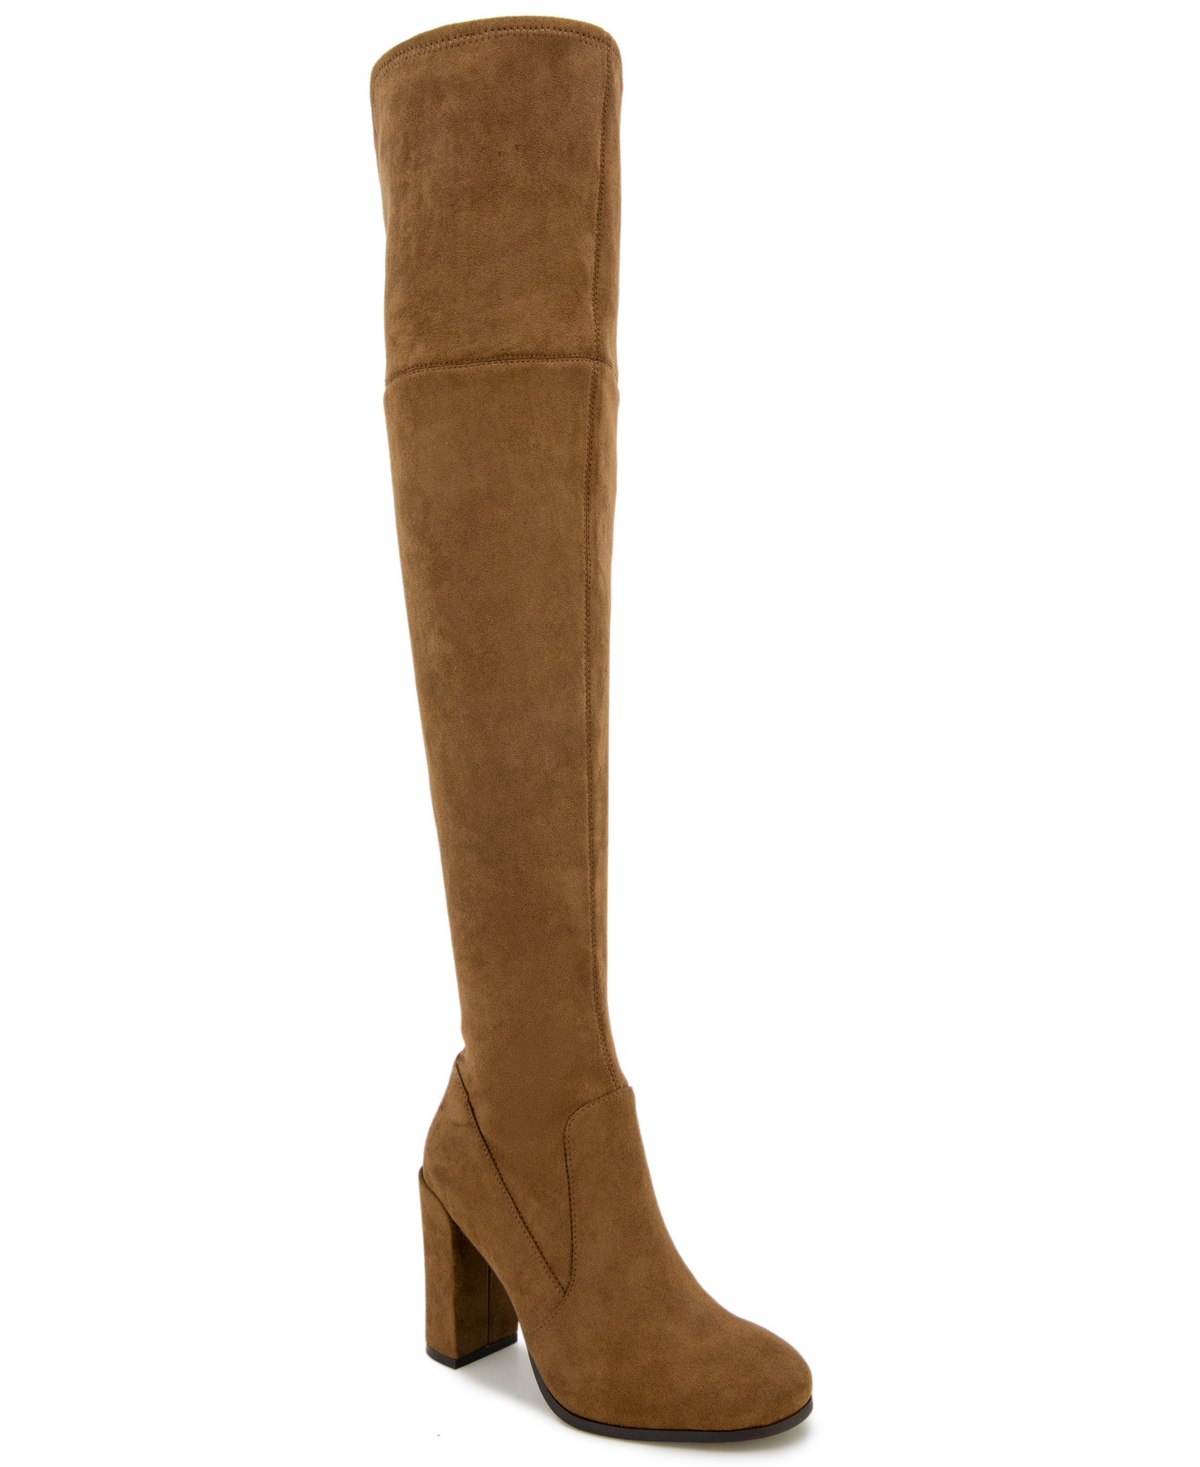 KENNETH COLE NEW YORK WOMEN'S JUSTIN OVER THE KNEE BOOTS WOMEN'S SHOES